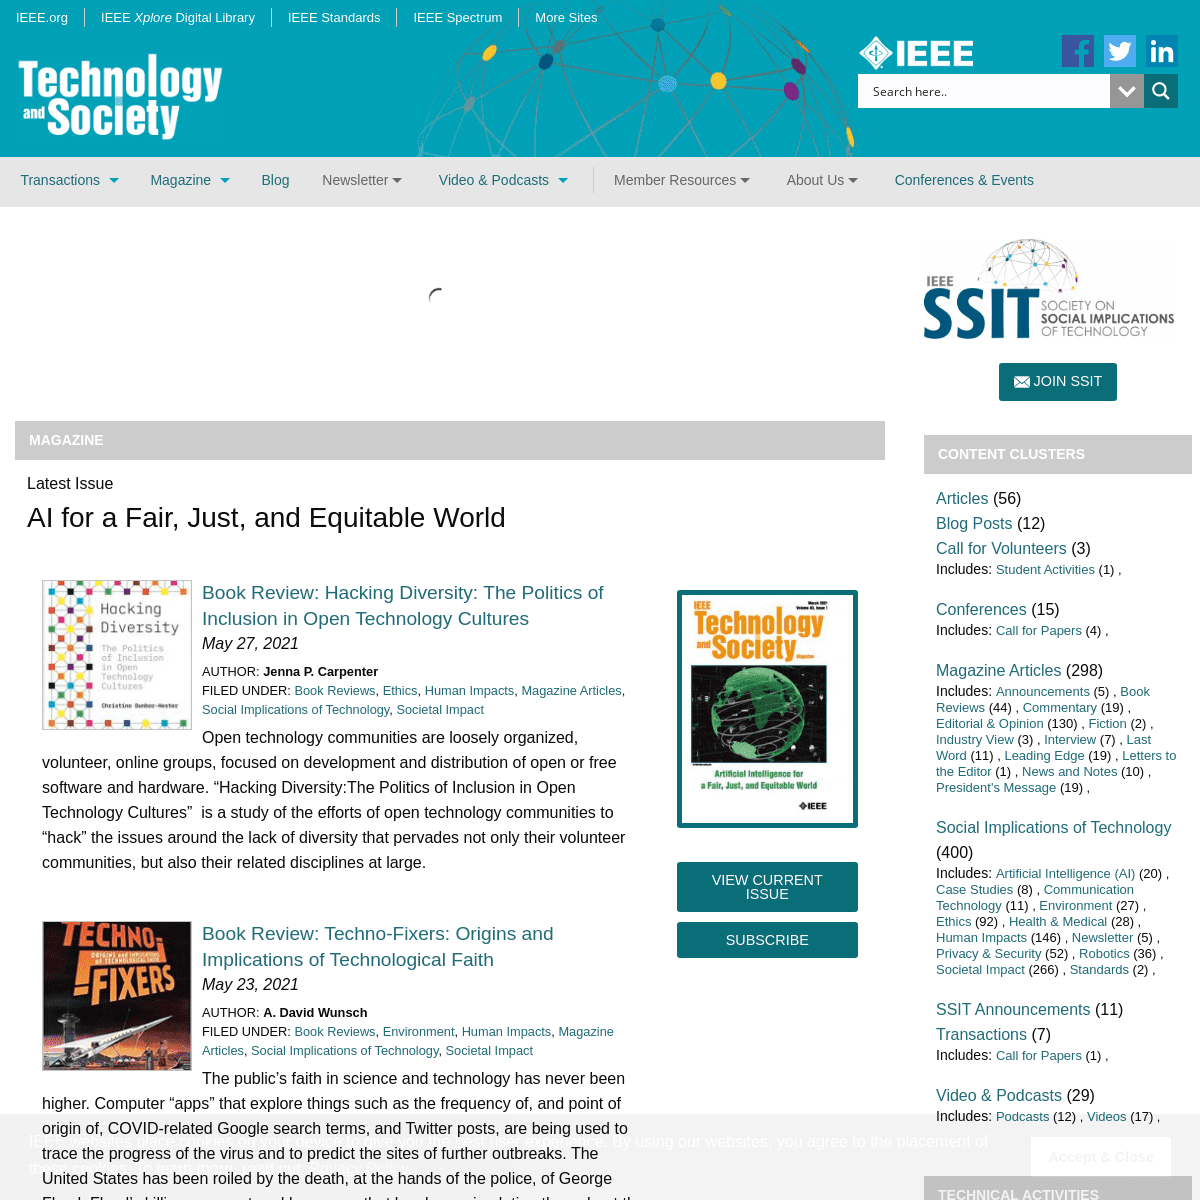 A complete backup of https://technologyandsociety.org